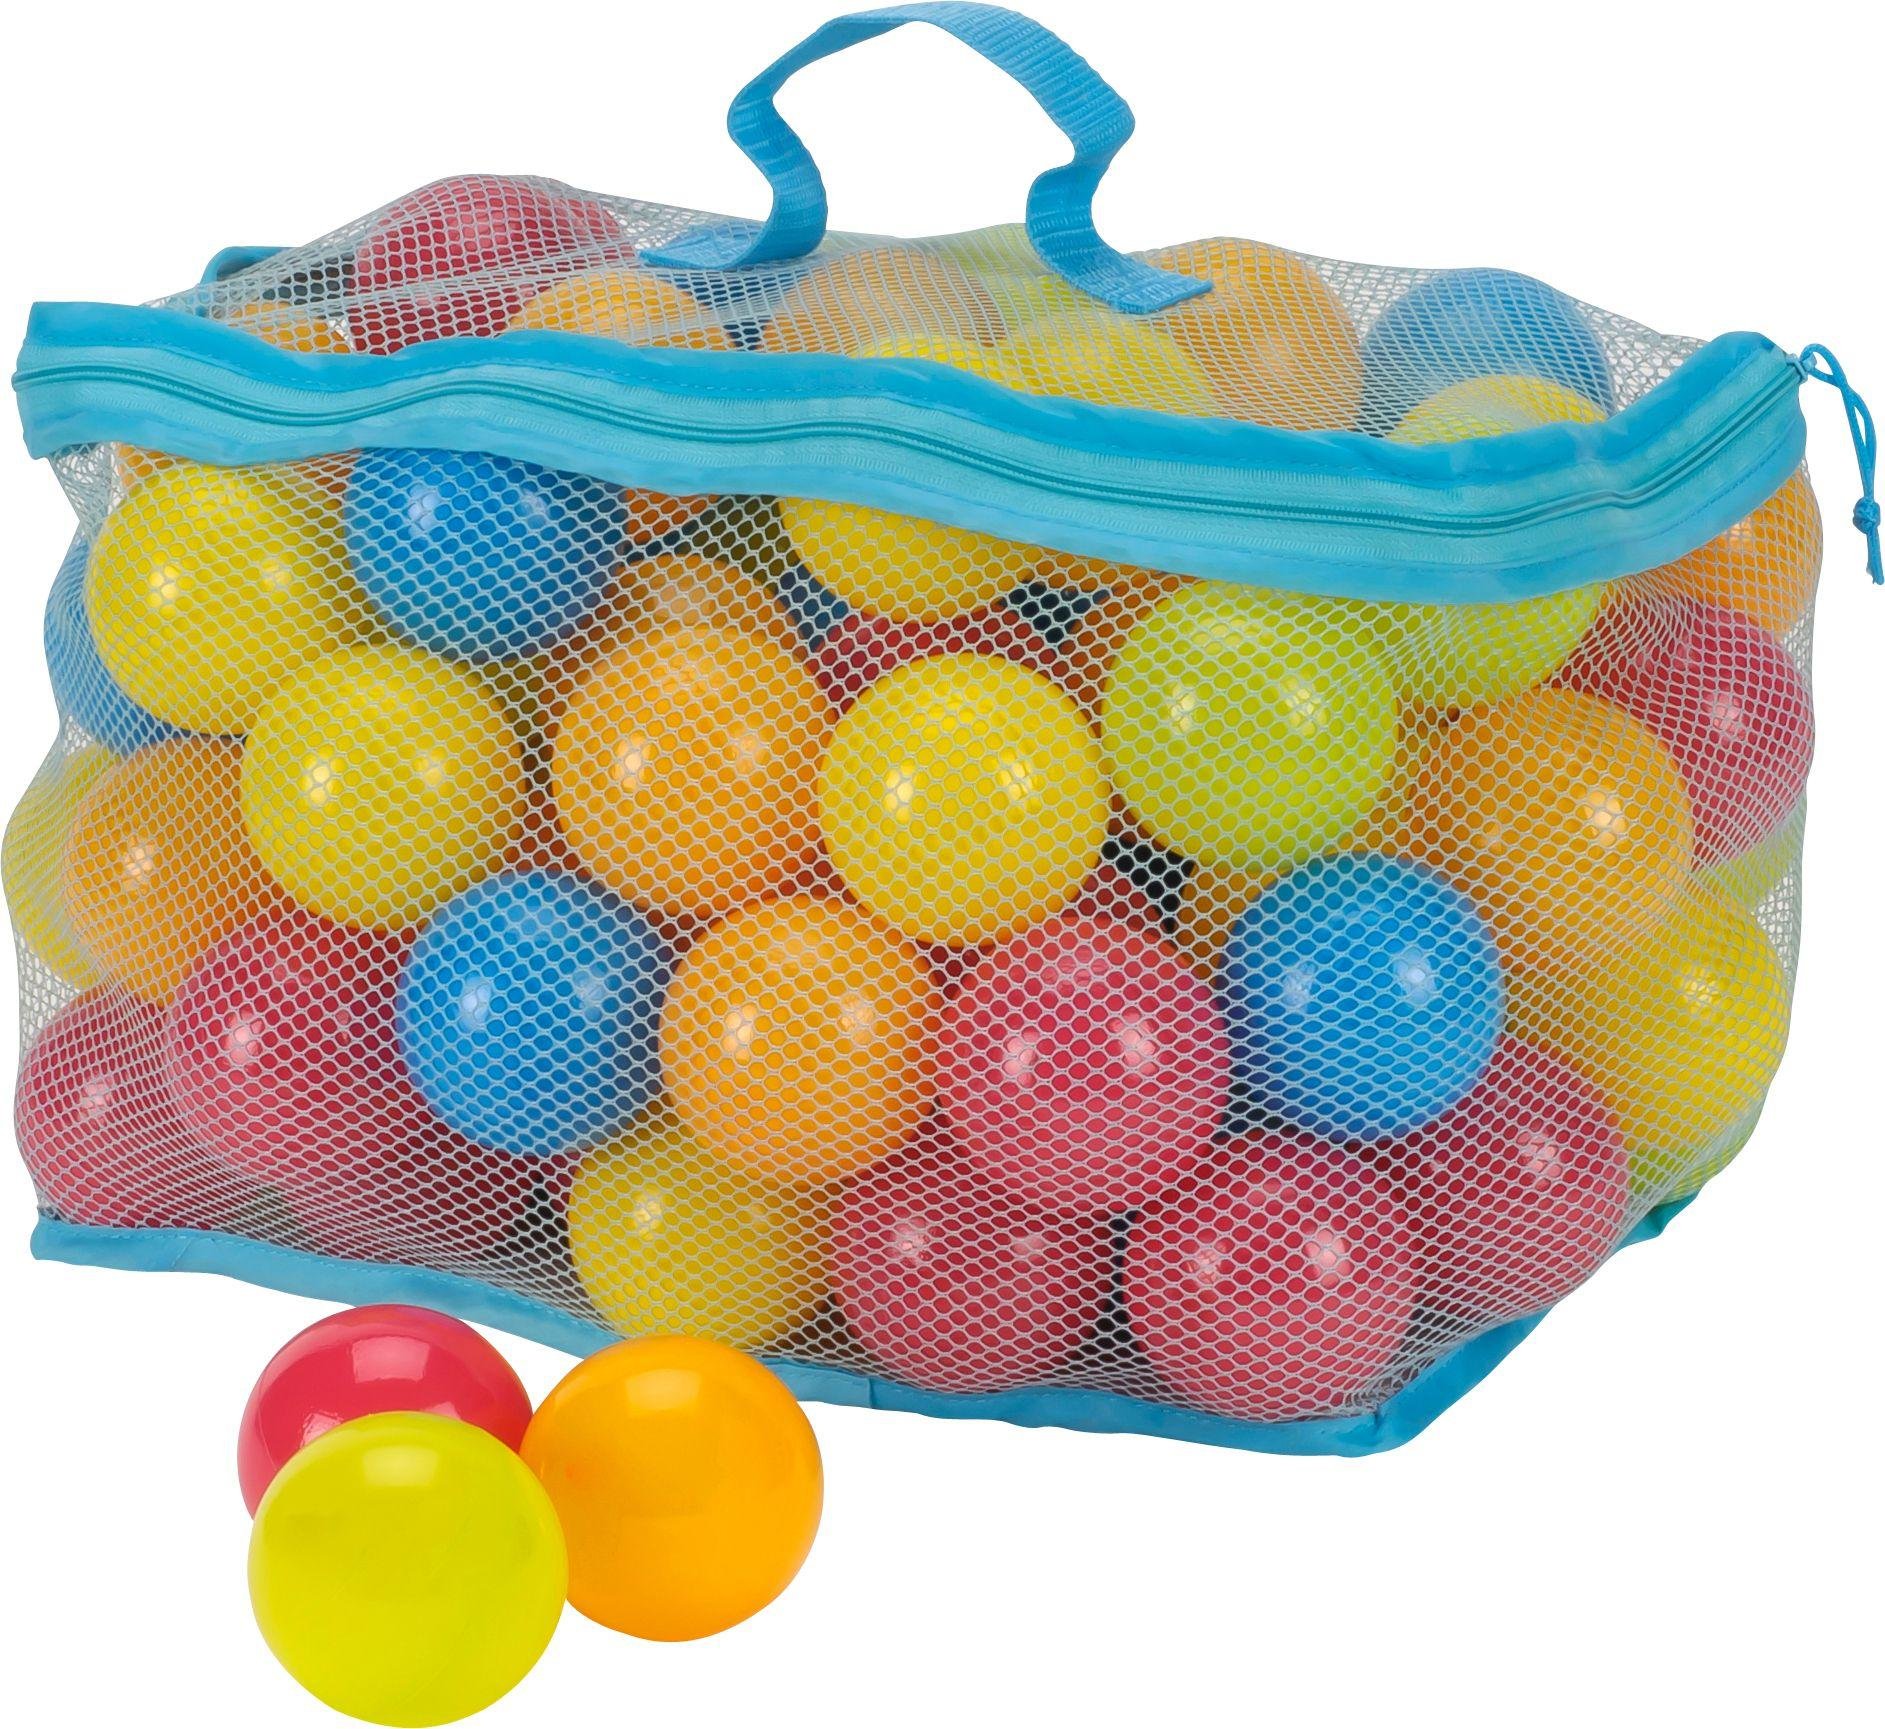 Chad Valley Bag of 100 Multi-Coloured Play Balls Review